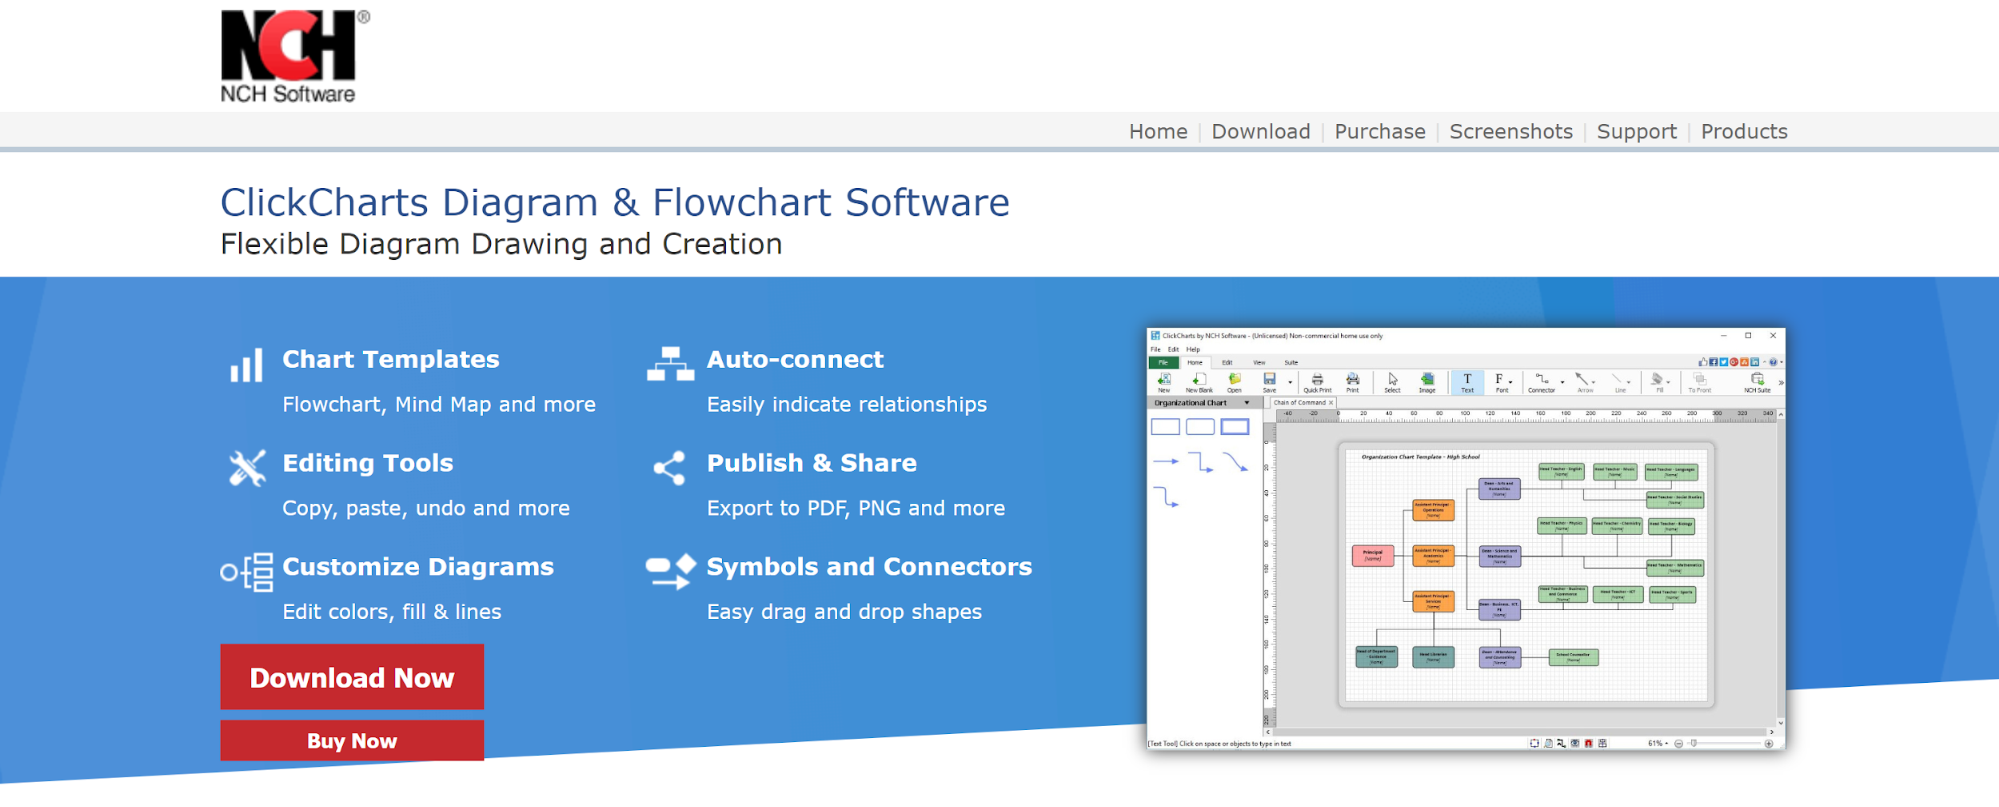 download the new version for windows NCH ClickCharts Pro 8.61